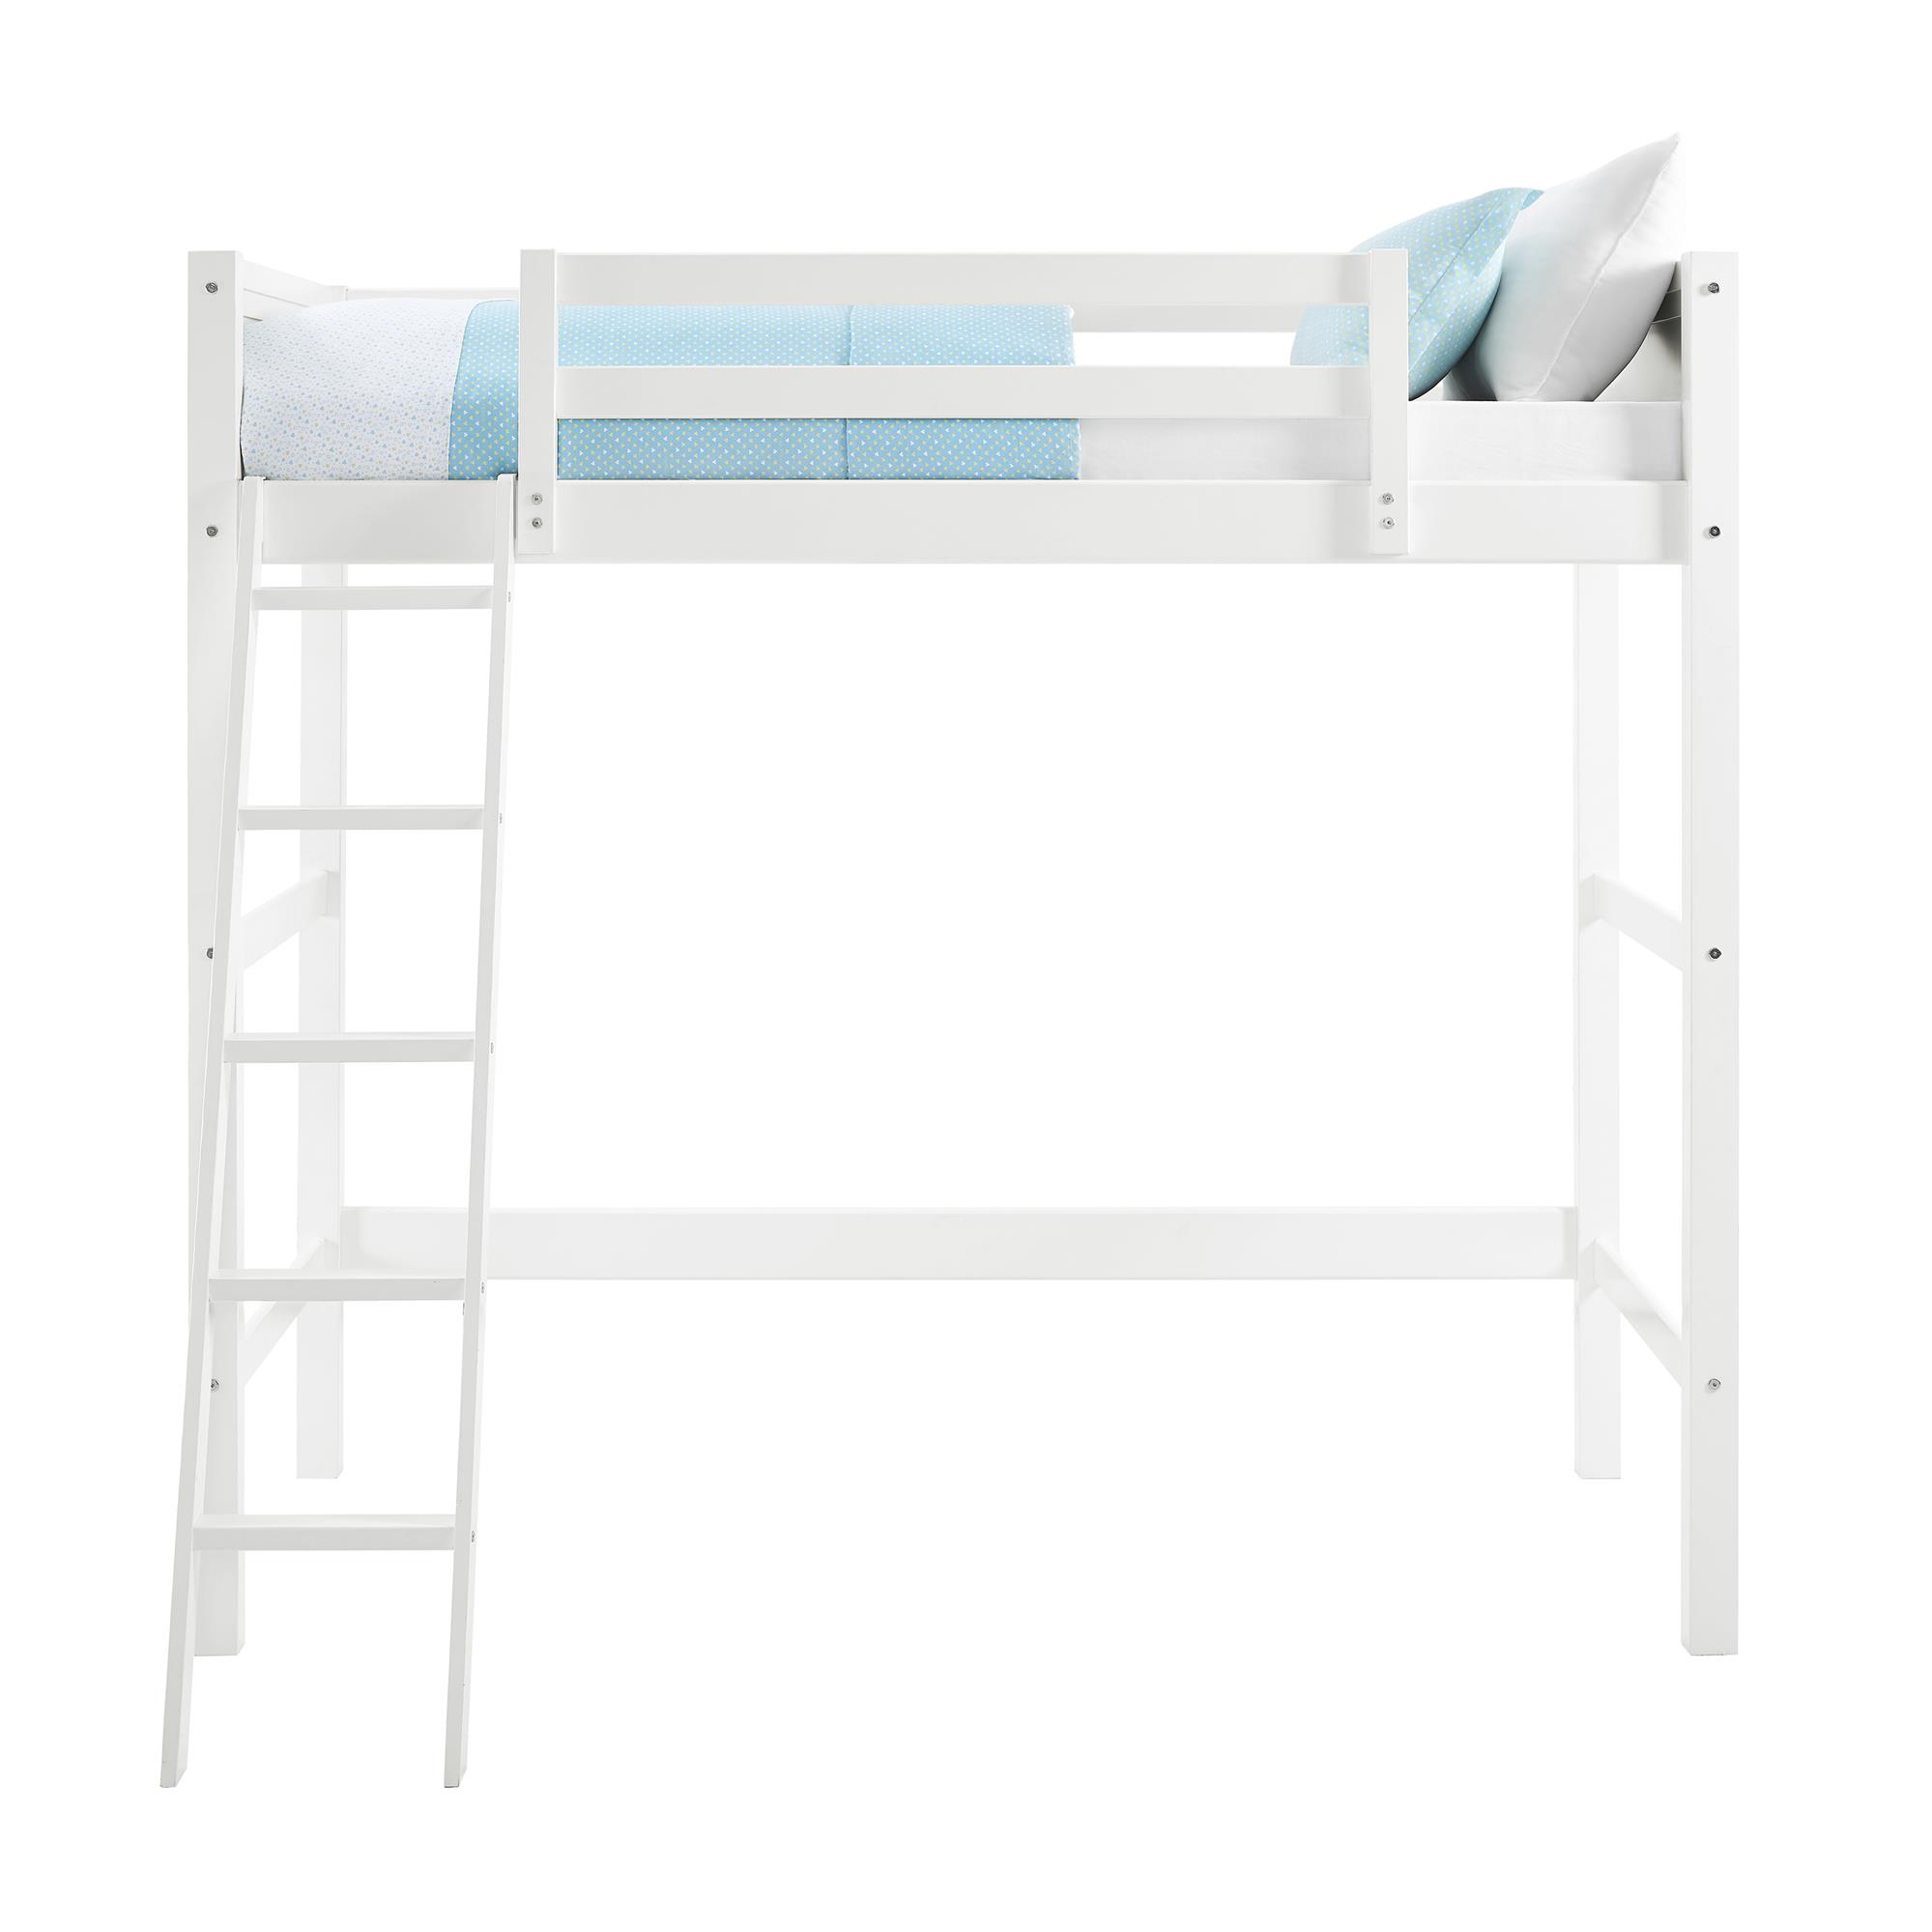 Your Zone Kiarah Twin Loft Bed with Ladder, White - image 4 of 18